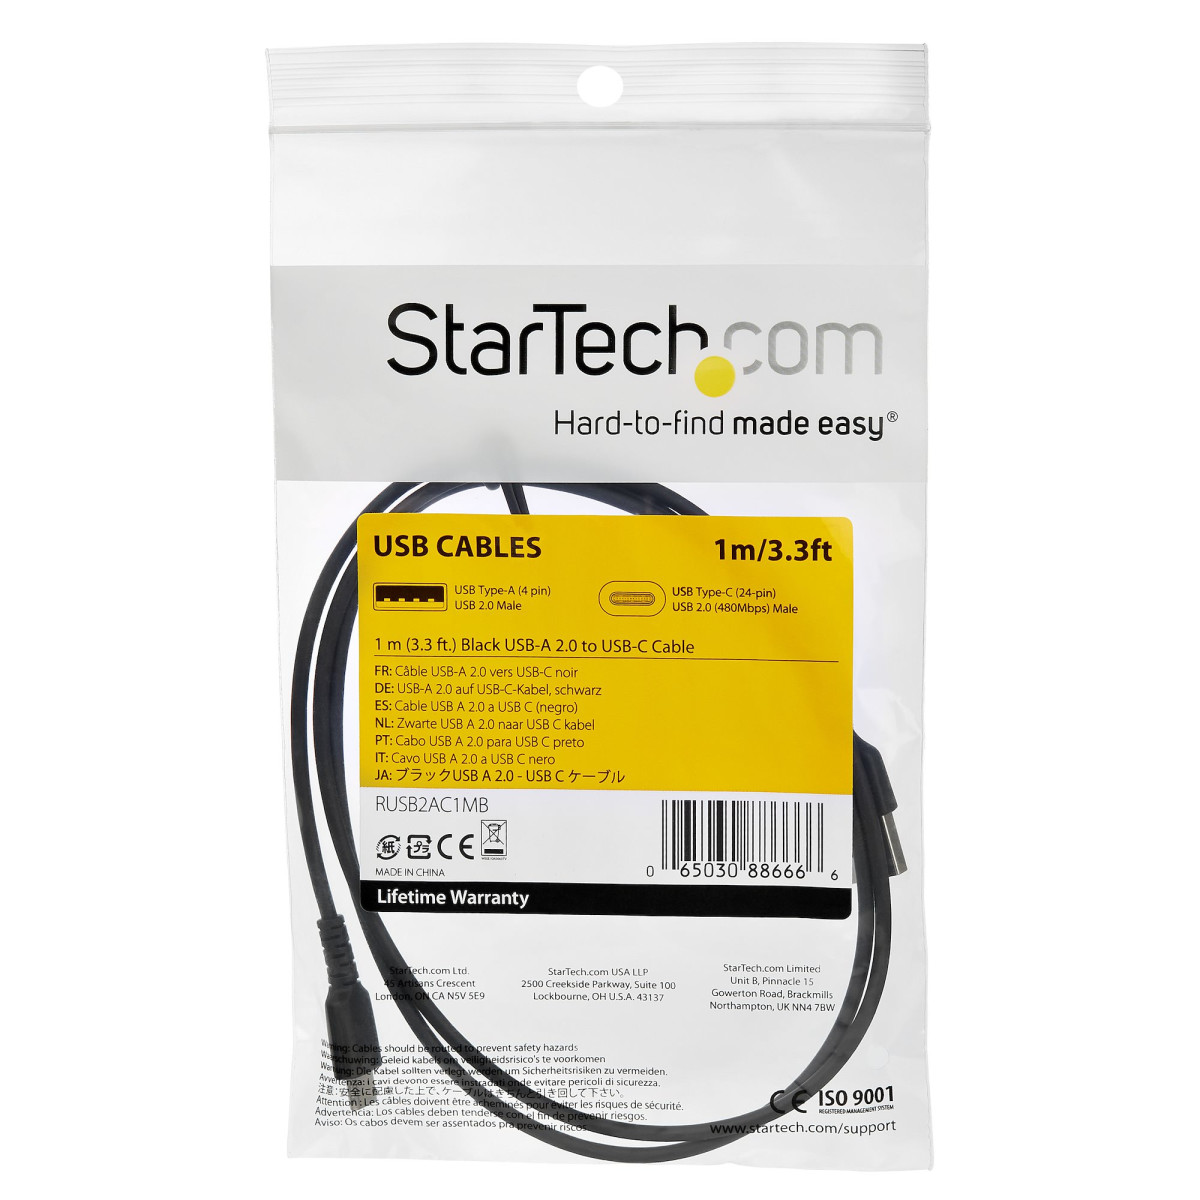 Cable - Black USB C Cable 1m